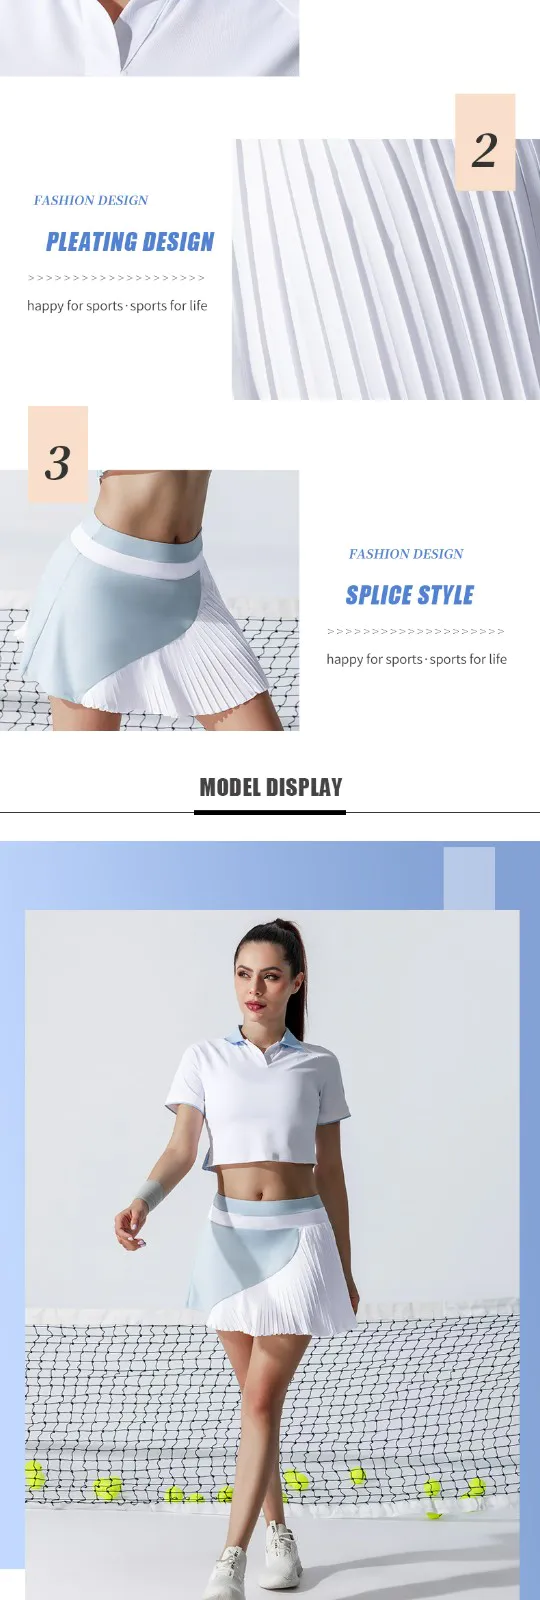 personalized tennis ladies clothing experts for girls